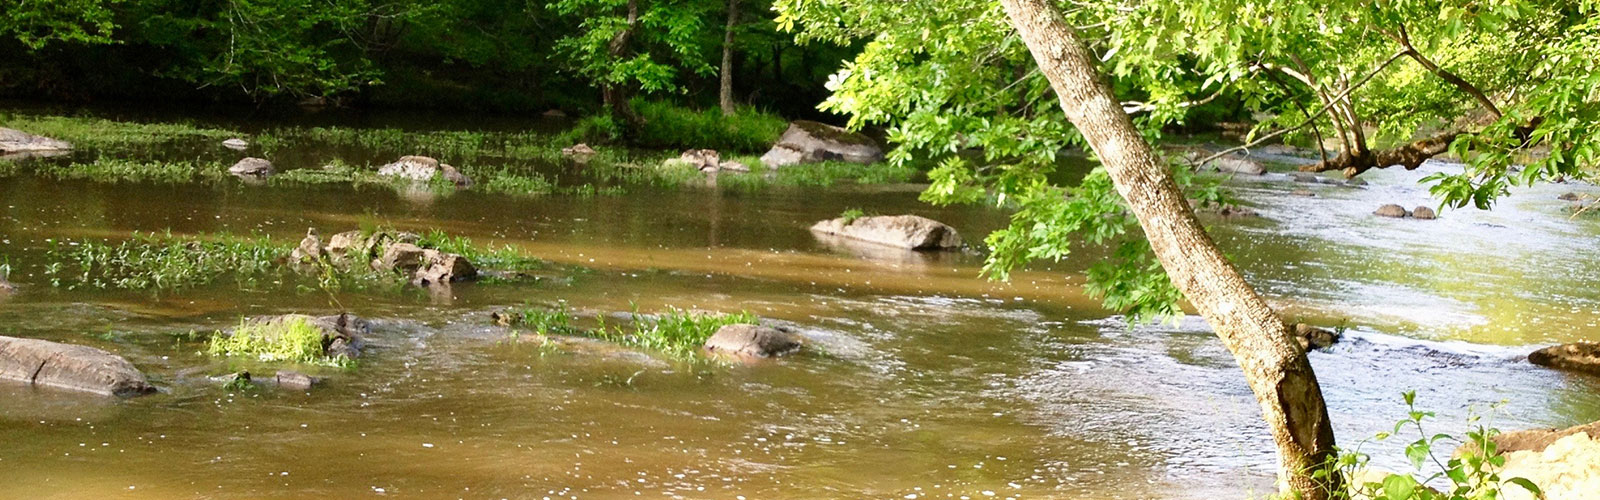 Image of a creek with trees